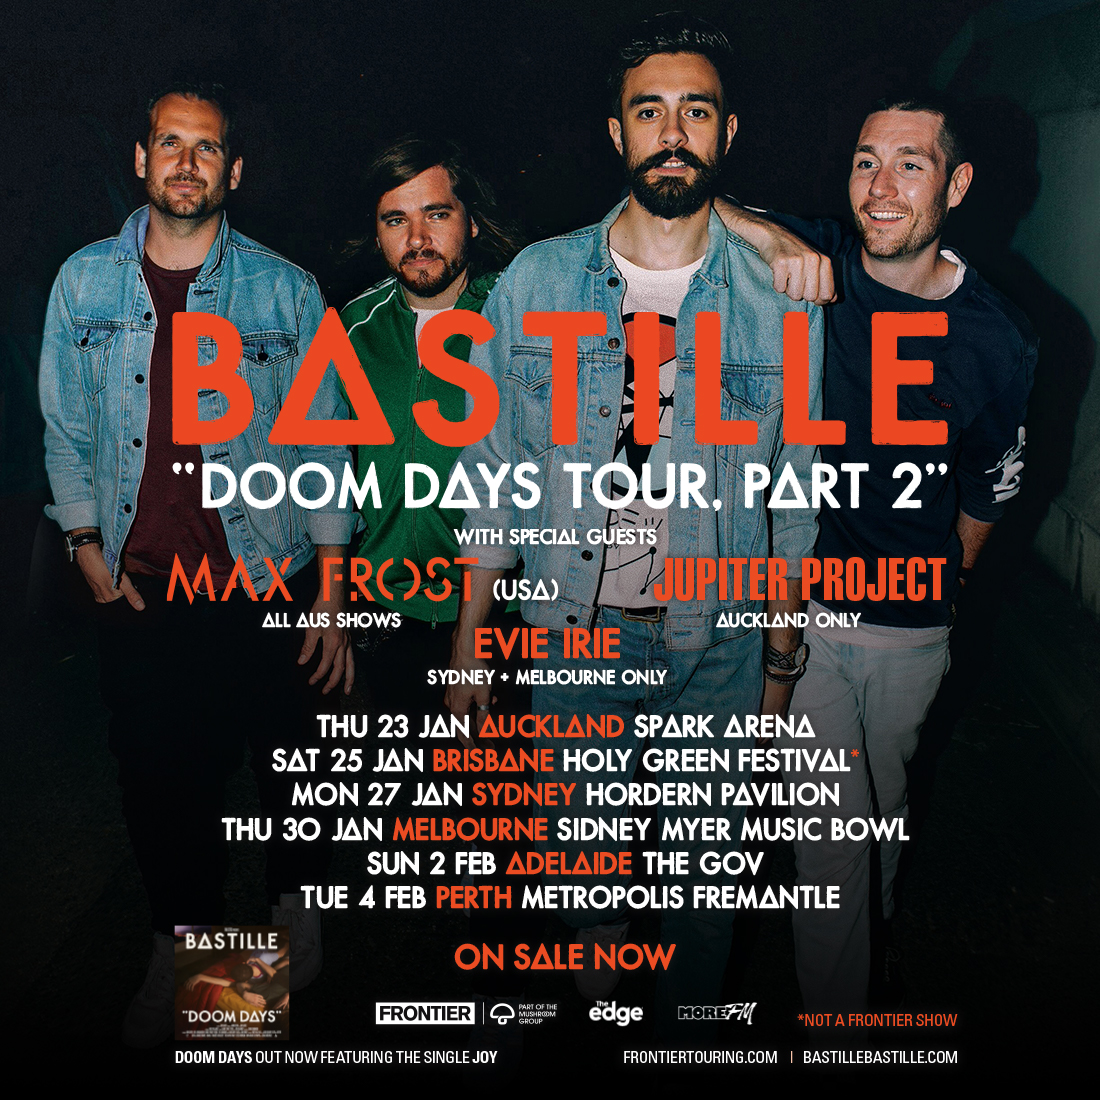 BASTILLE ANNOUNCE SPECIAL GUESTS MAX FROST, EVIE IRIE & JUPITER PROJECT ON THEIR DOOM DAYS TOUR